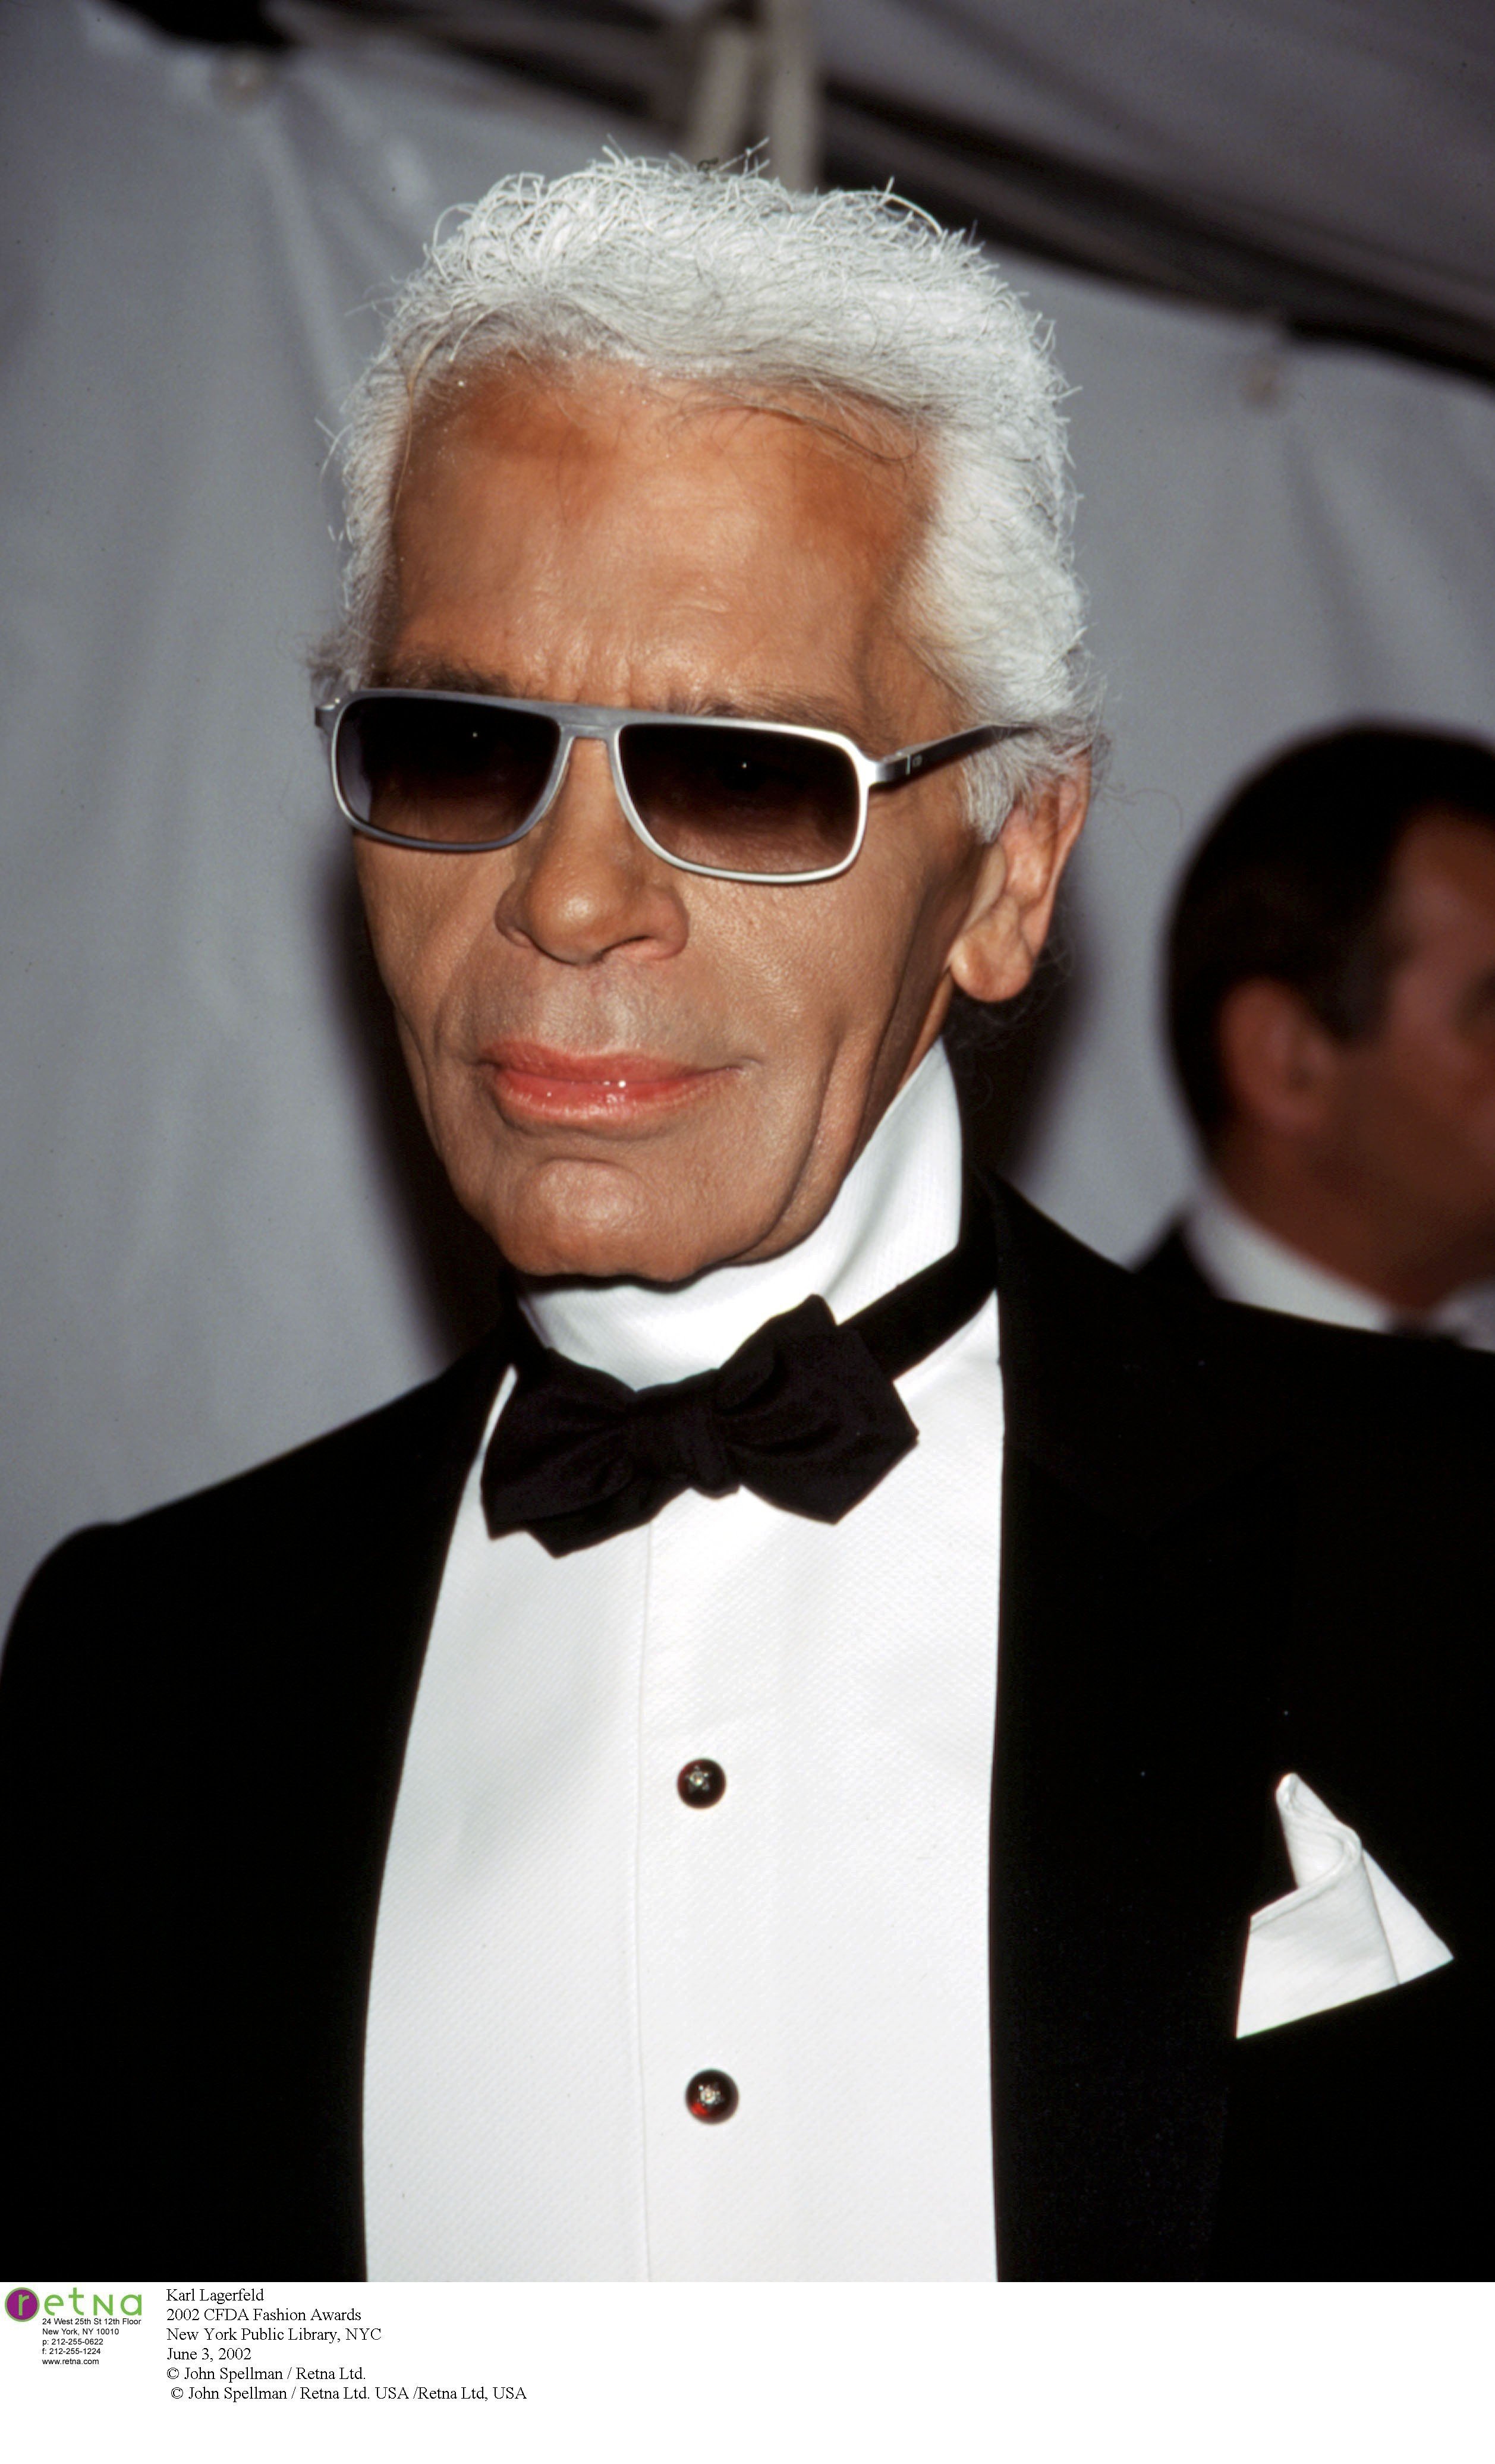 Kaiser Karl' Lagerfeld insulted some very powerful people during his  fashion career - ABC News